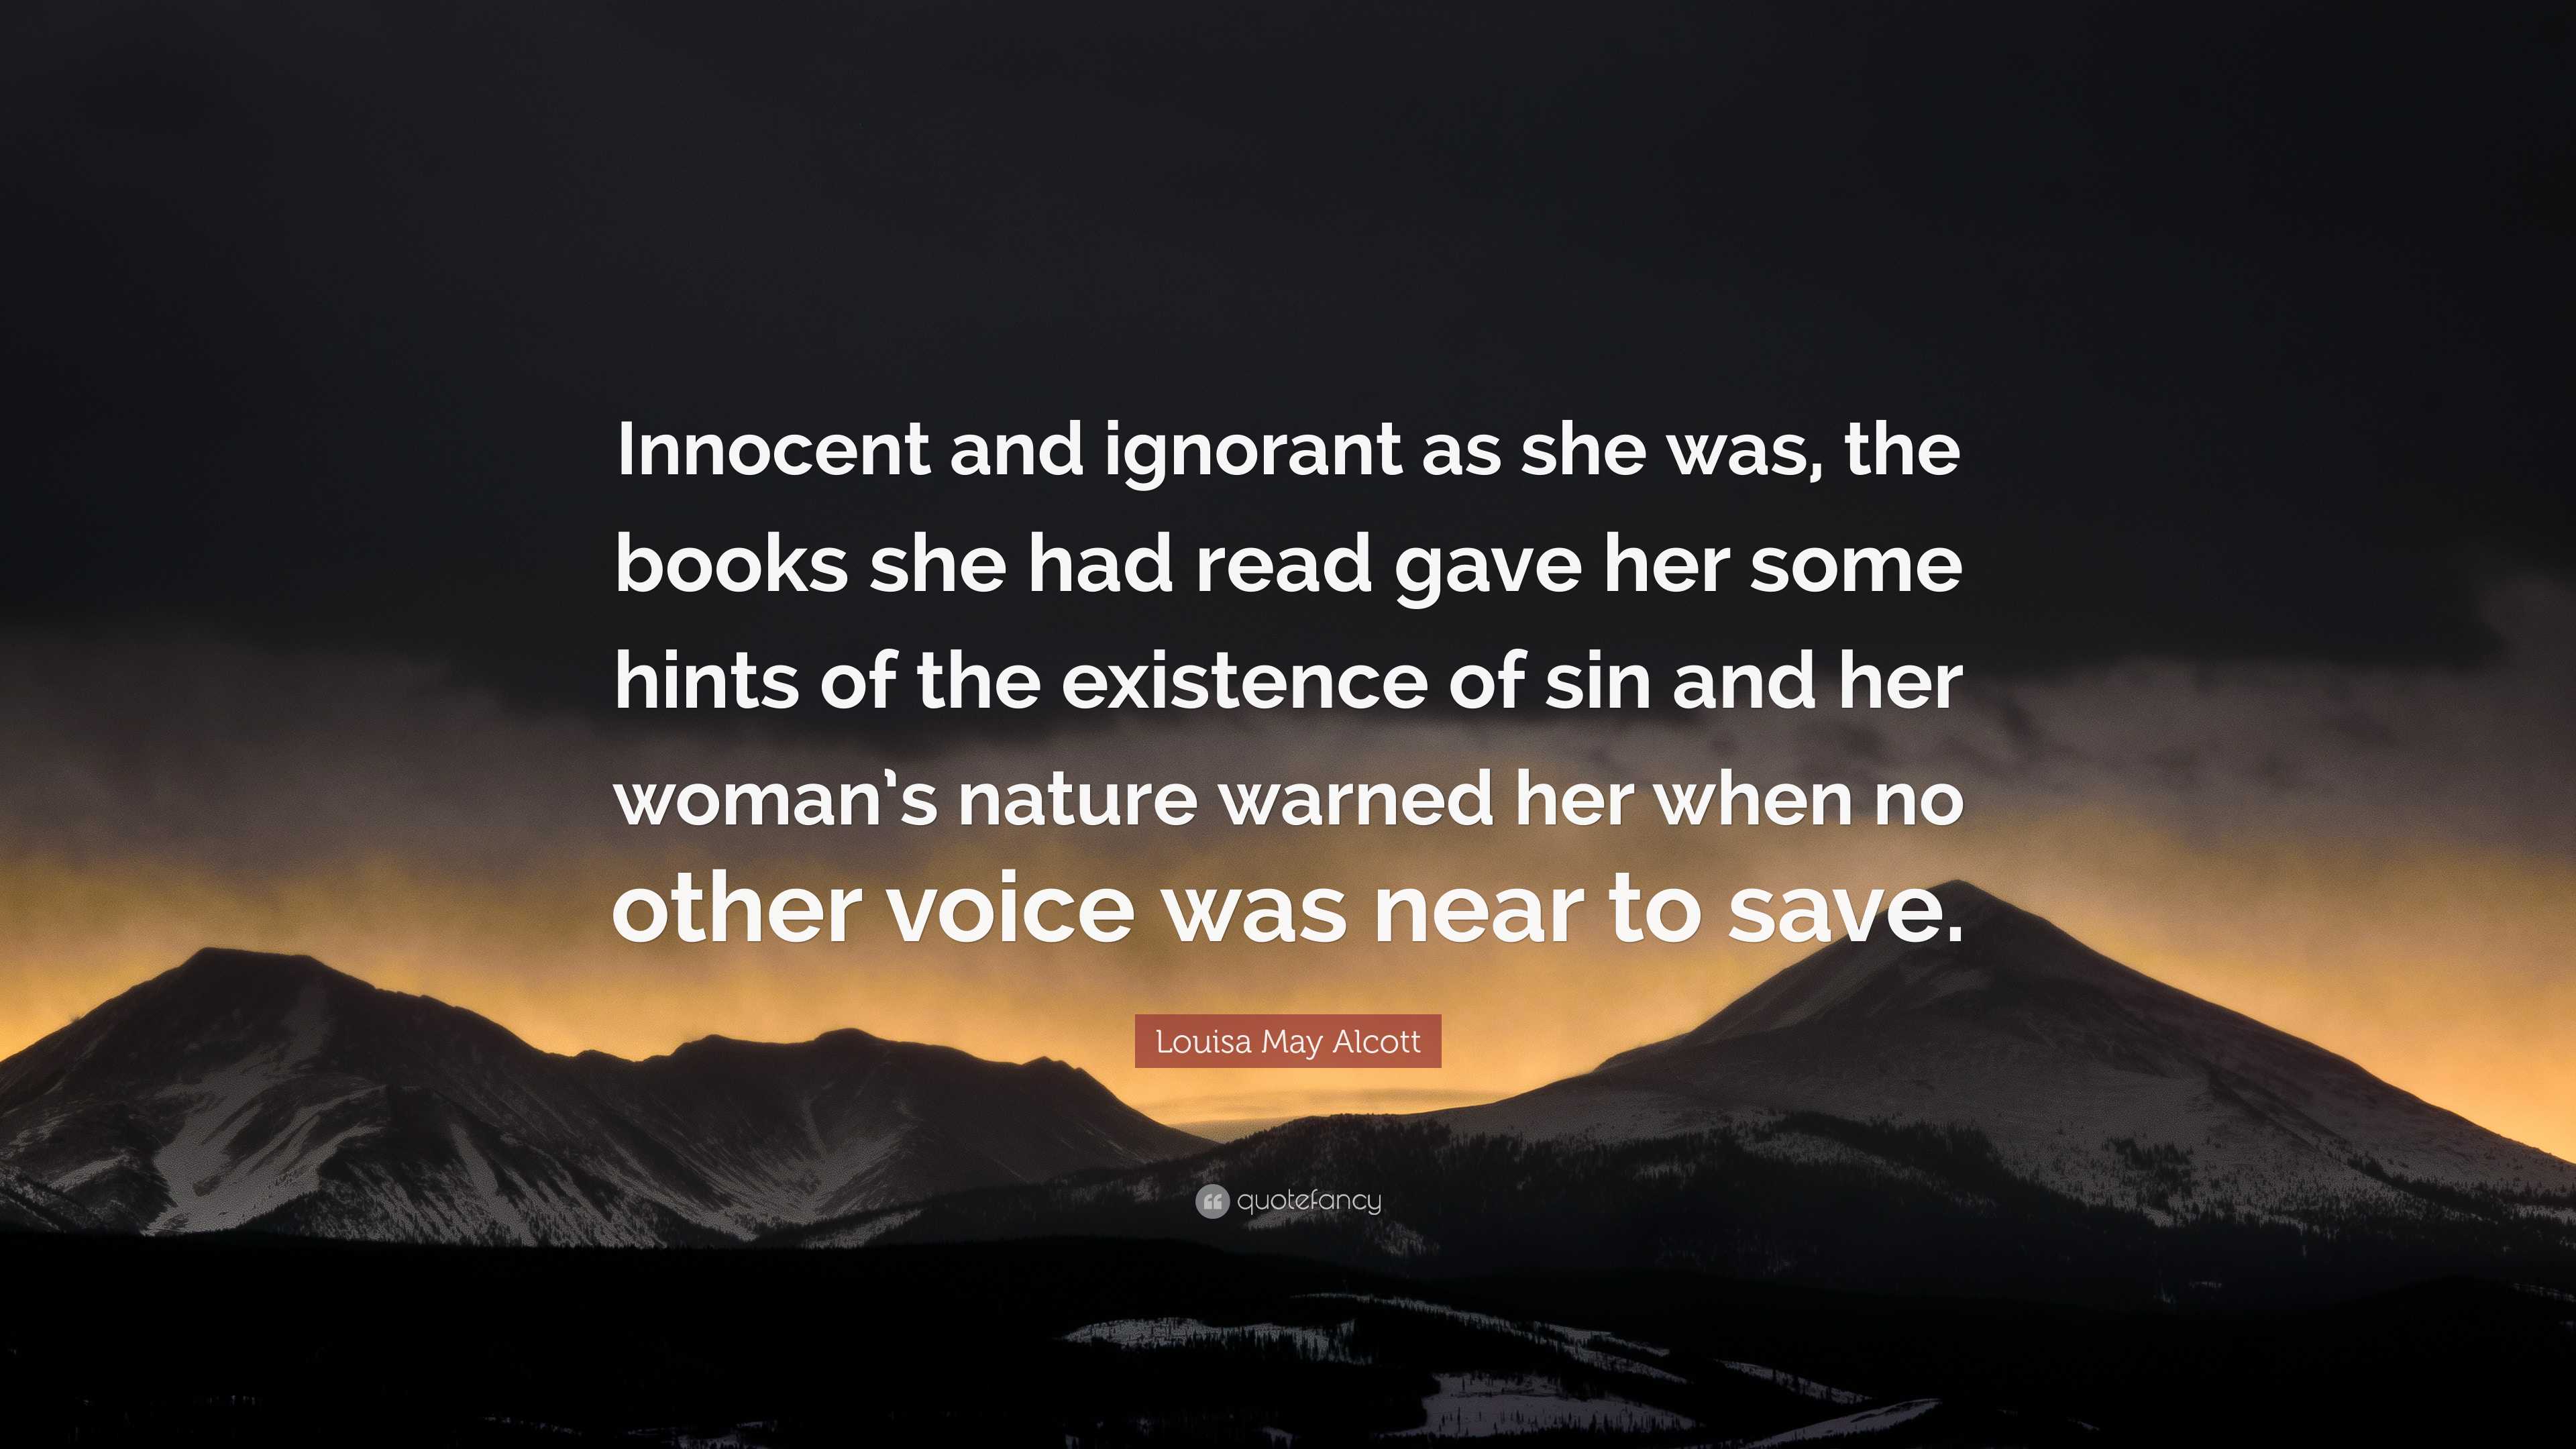 Louisa May Alcott Quote: “Innocent and ignorant as she was